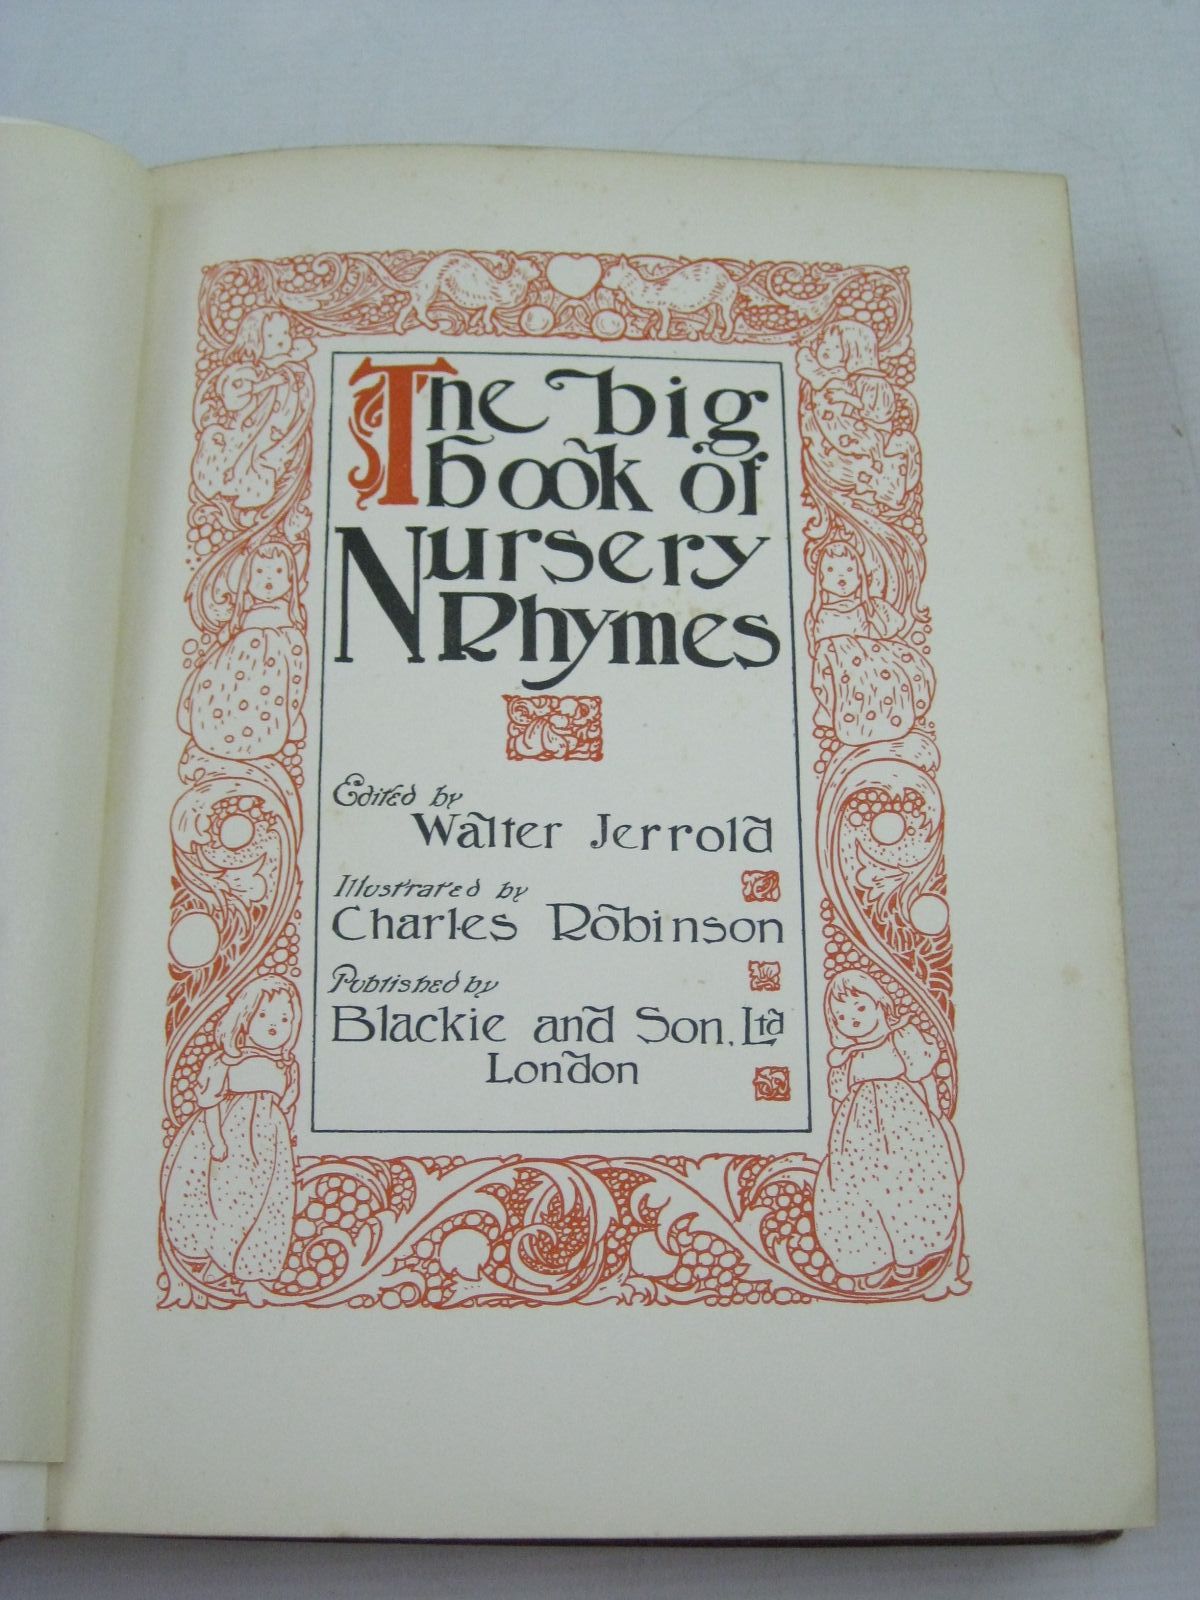 Photo of THE BIG BOOK OF NURSERY RHYMES written by Jerrold, Walter illustrated by Robinson, Charles published by Blackie & Son Ltd. (STOCK CODE: 1505036)  for sale by Stella & Rose's Books